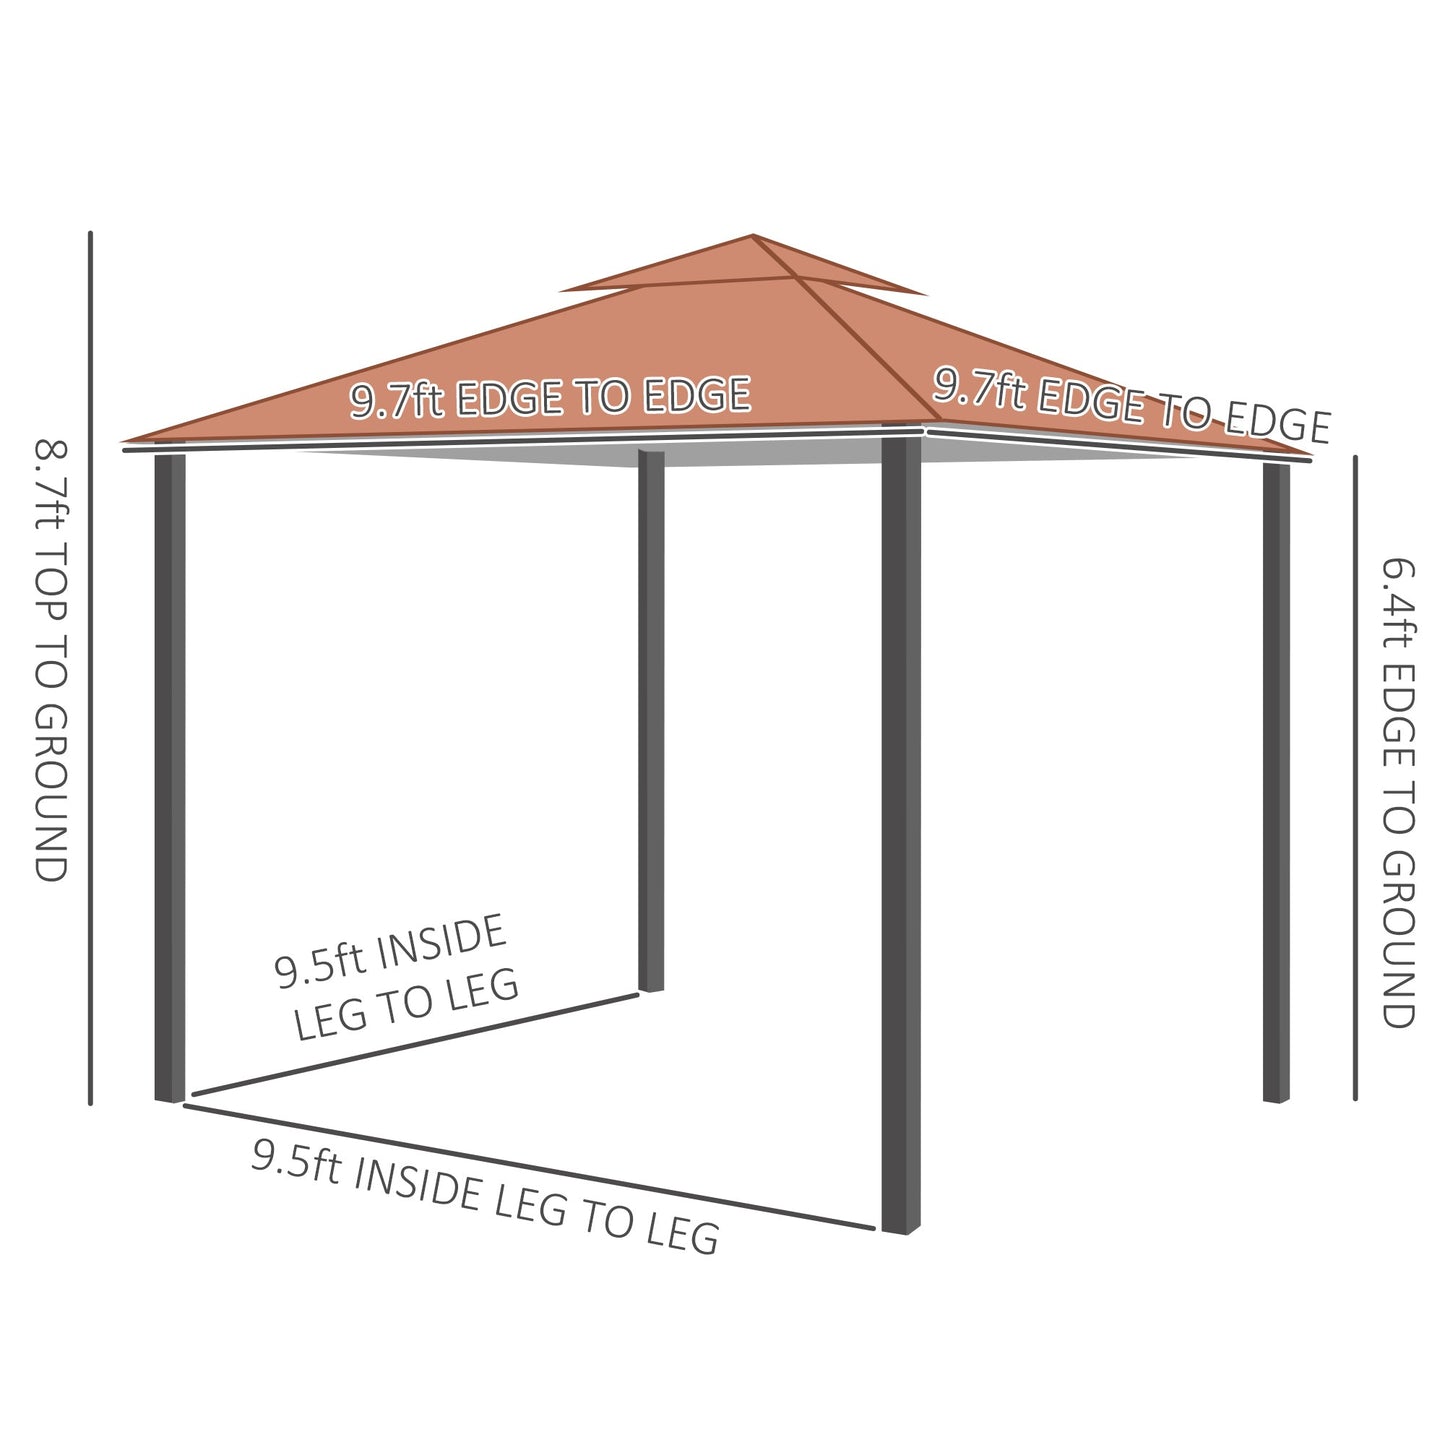 -Outsunny 10' x 10' Patio Gazebo Outdoor Canopy Shelter with Double Vented Roof, Netting and Curtains for Garden, Lawn, Backyard and Deck, Brown - Outdoor Style Company